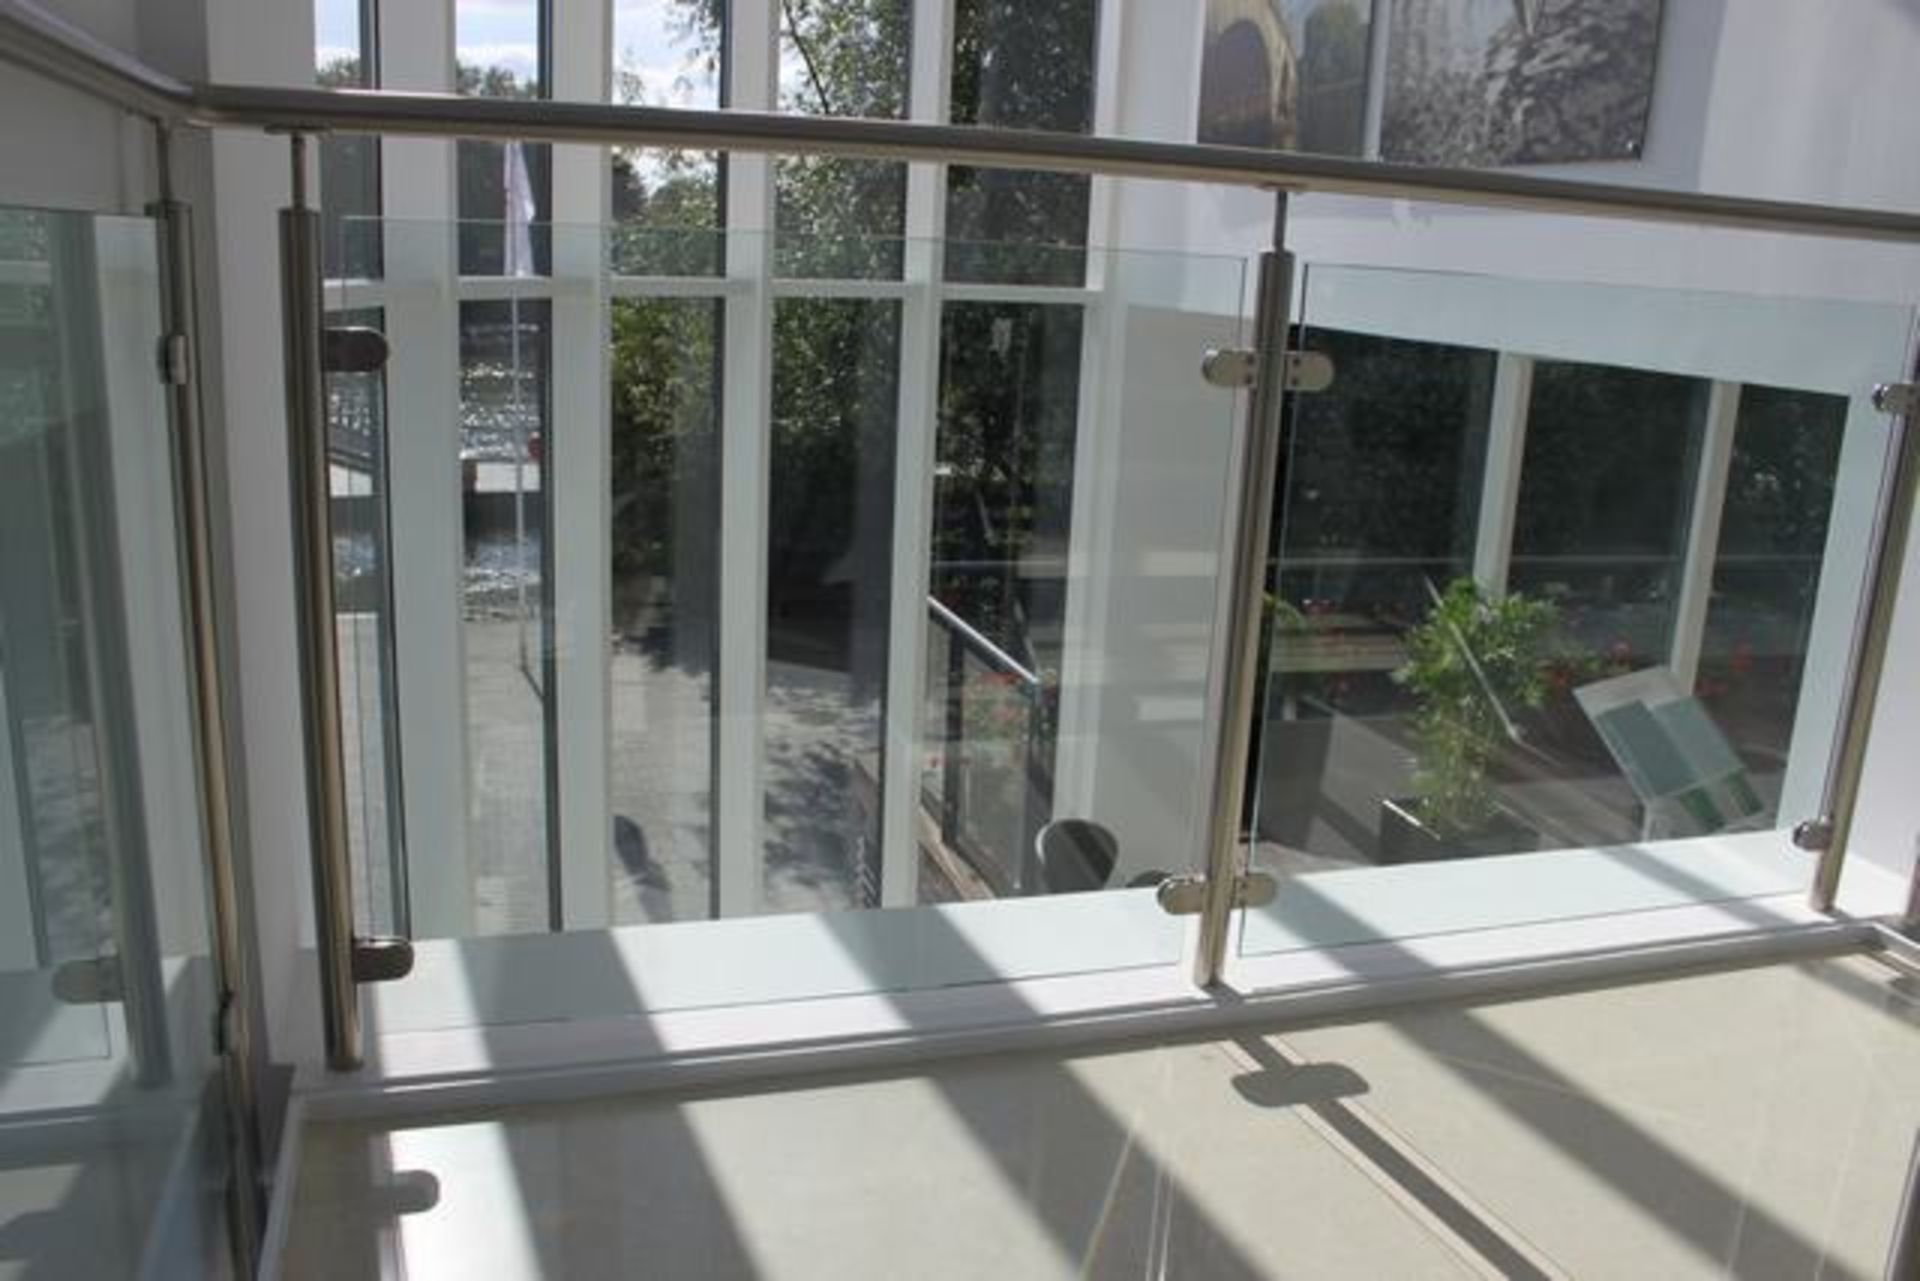 4 x Toughened glass balustrade panels 10mm thick rake 2 x angled 850mm x 700mm and 2 x square